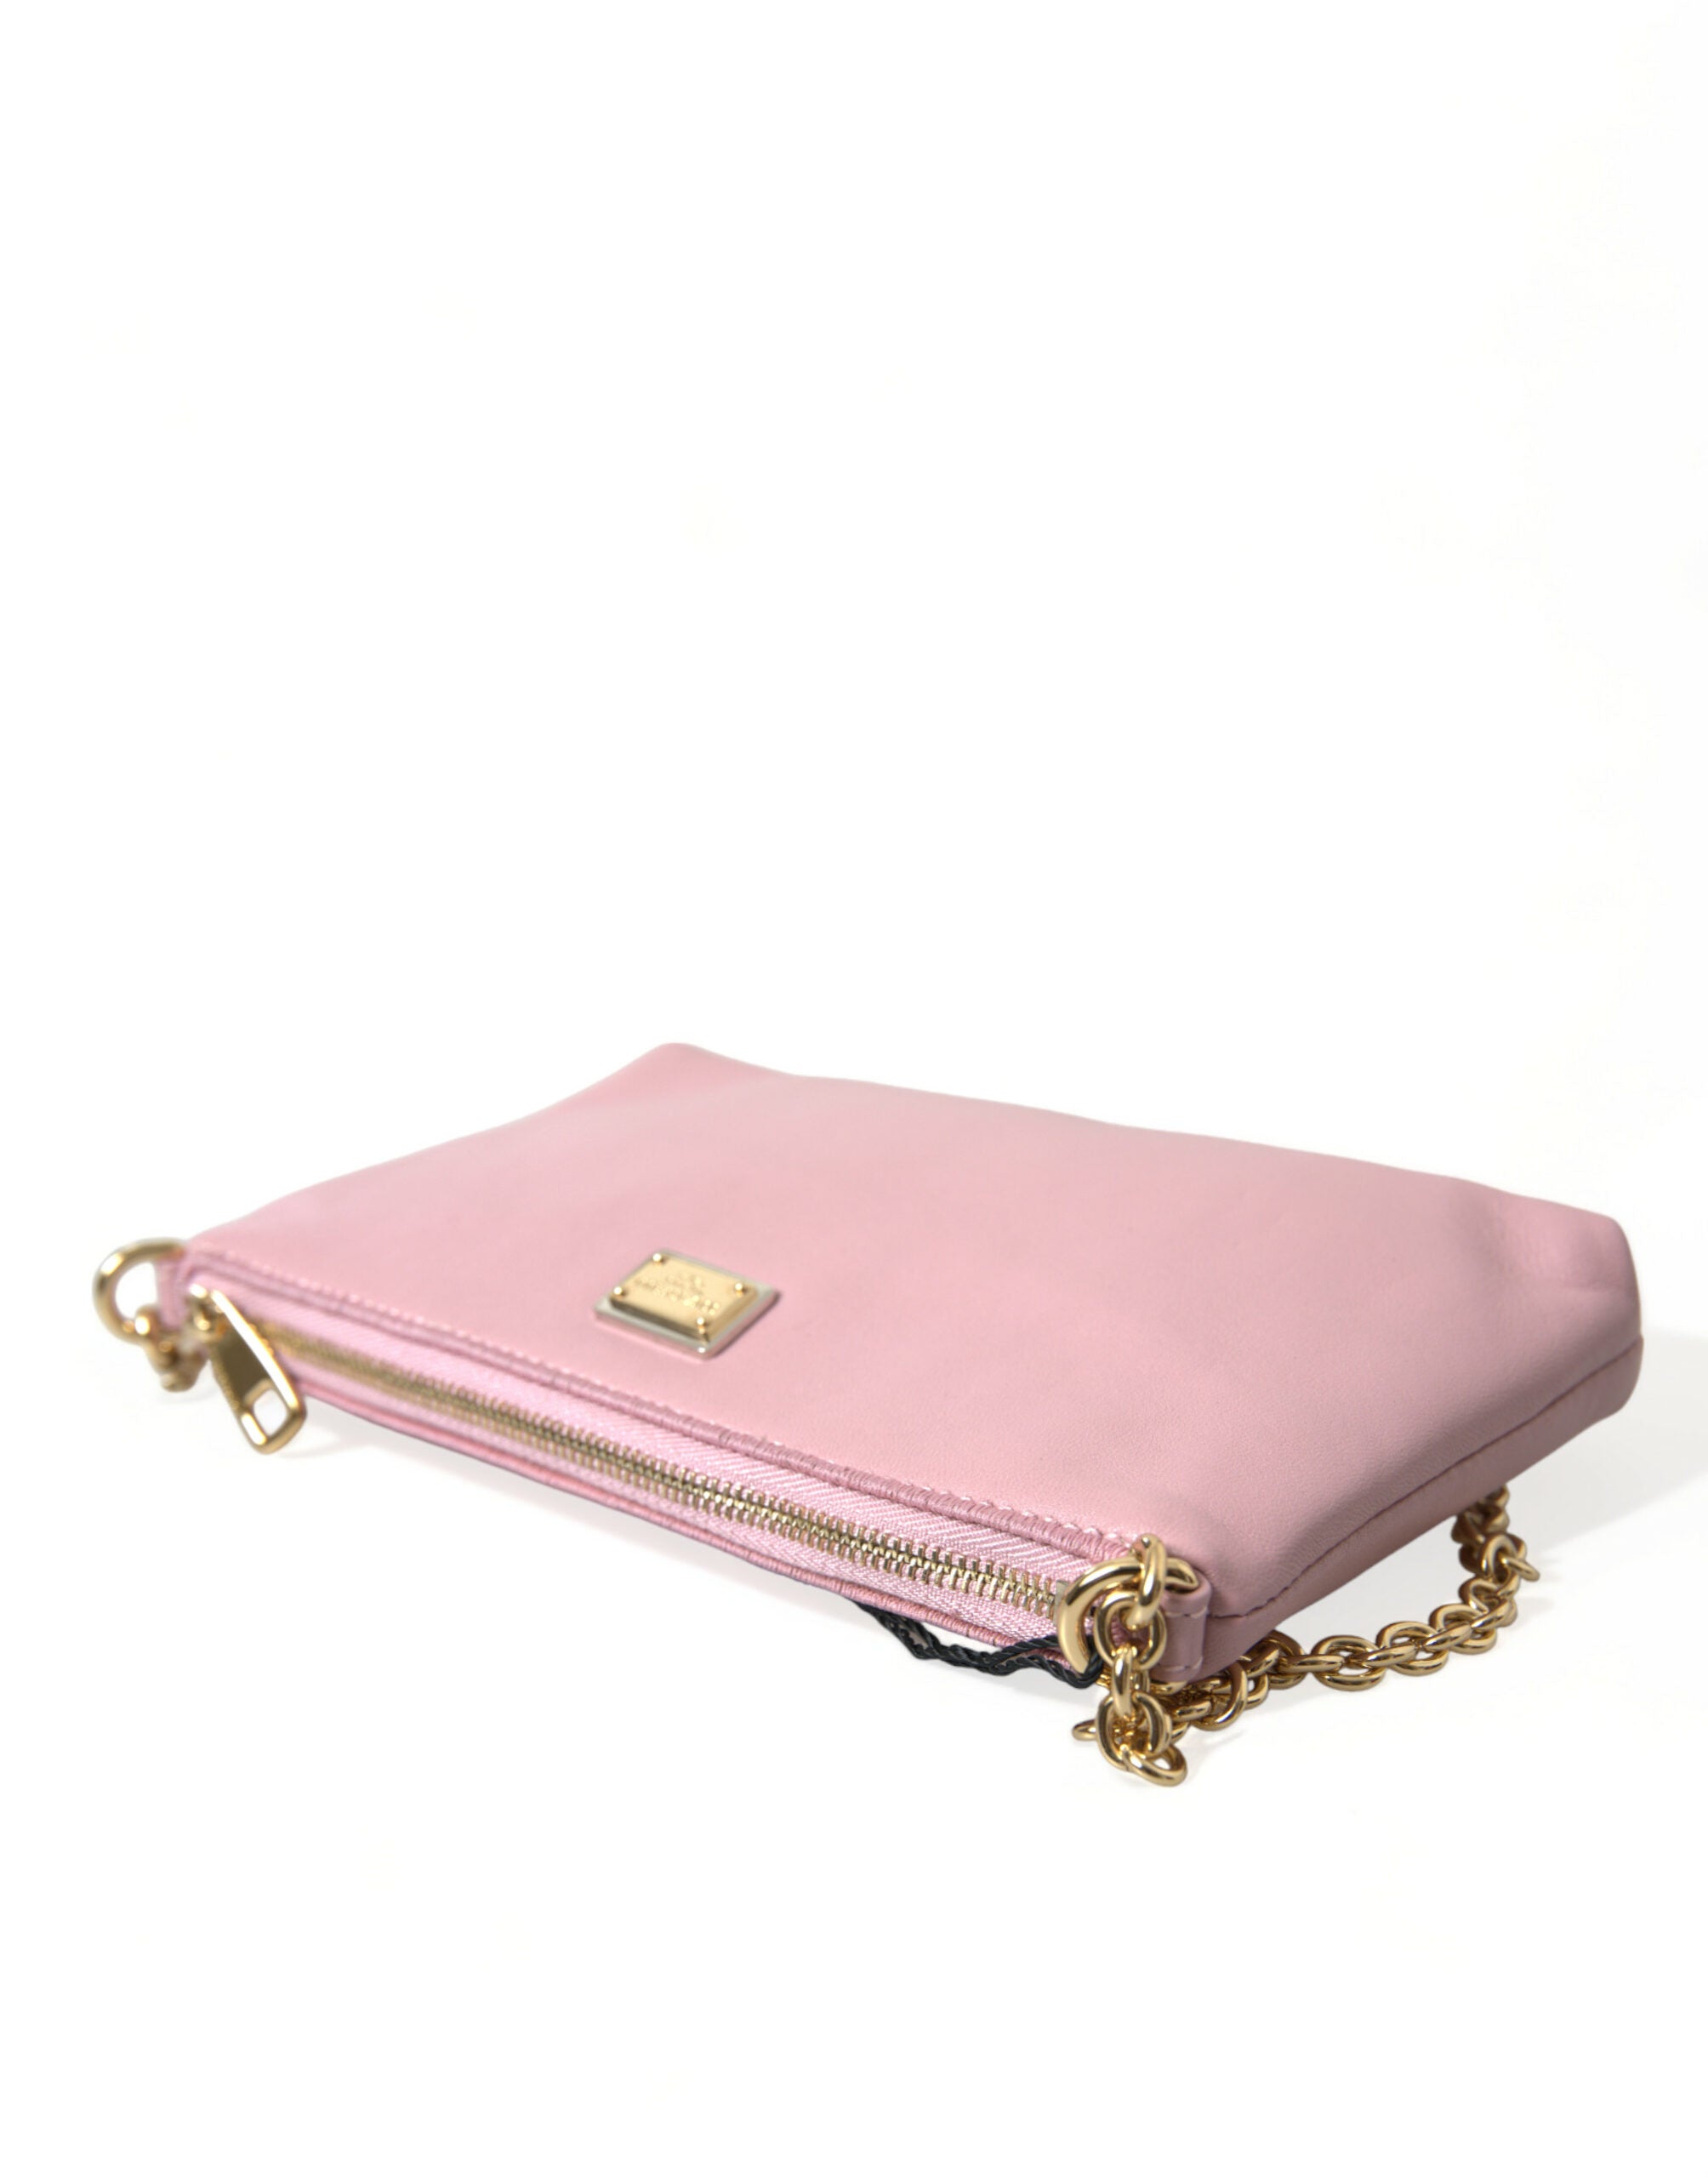 Dolce & Gabbana Elegant Pink Leather Pouch Clutch with Floral Embroidery